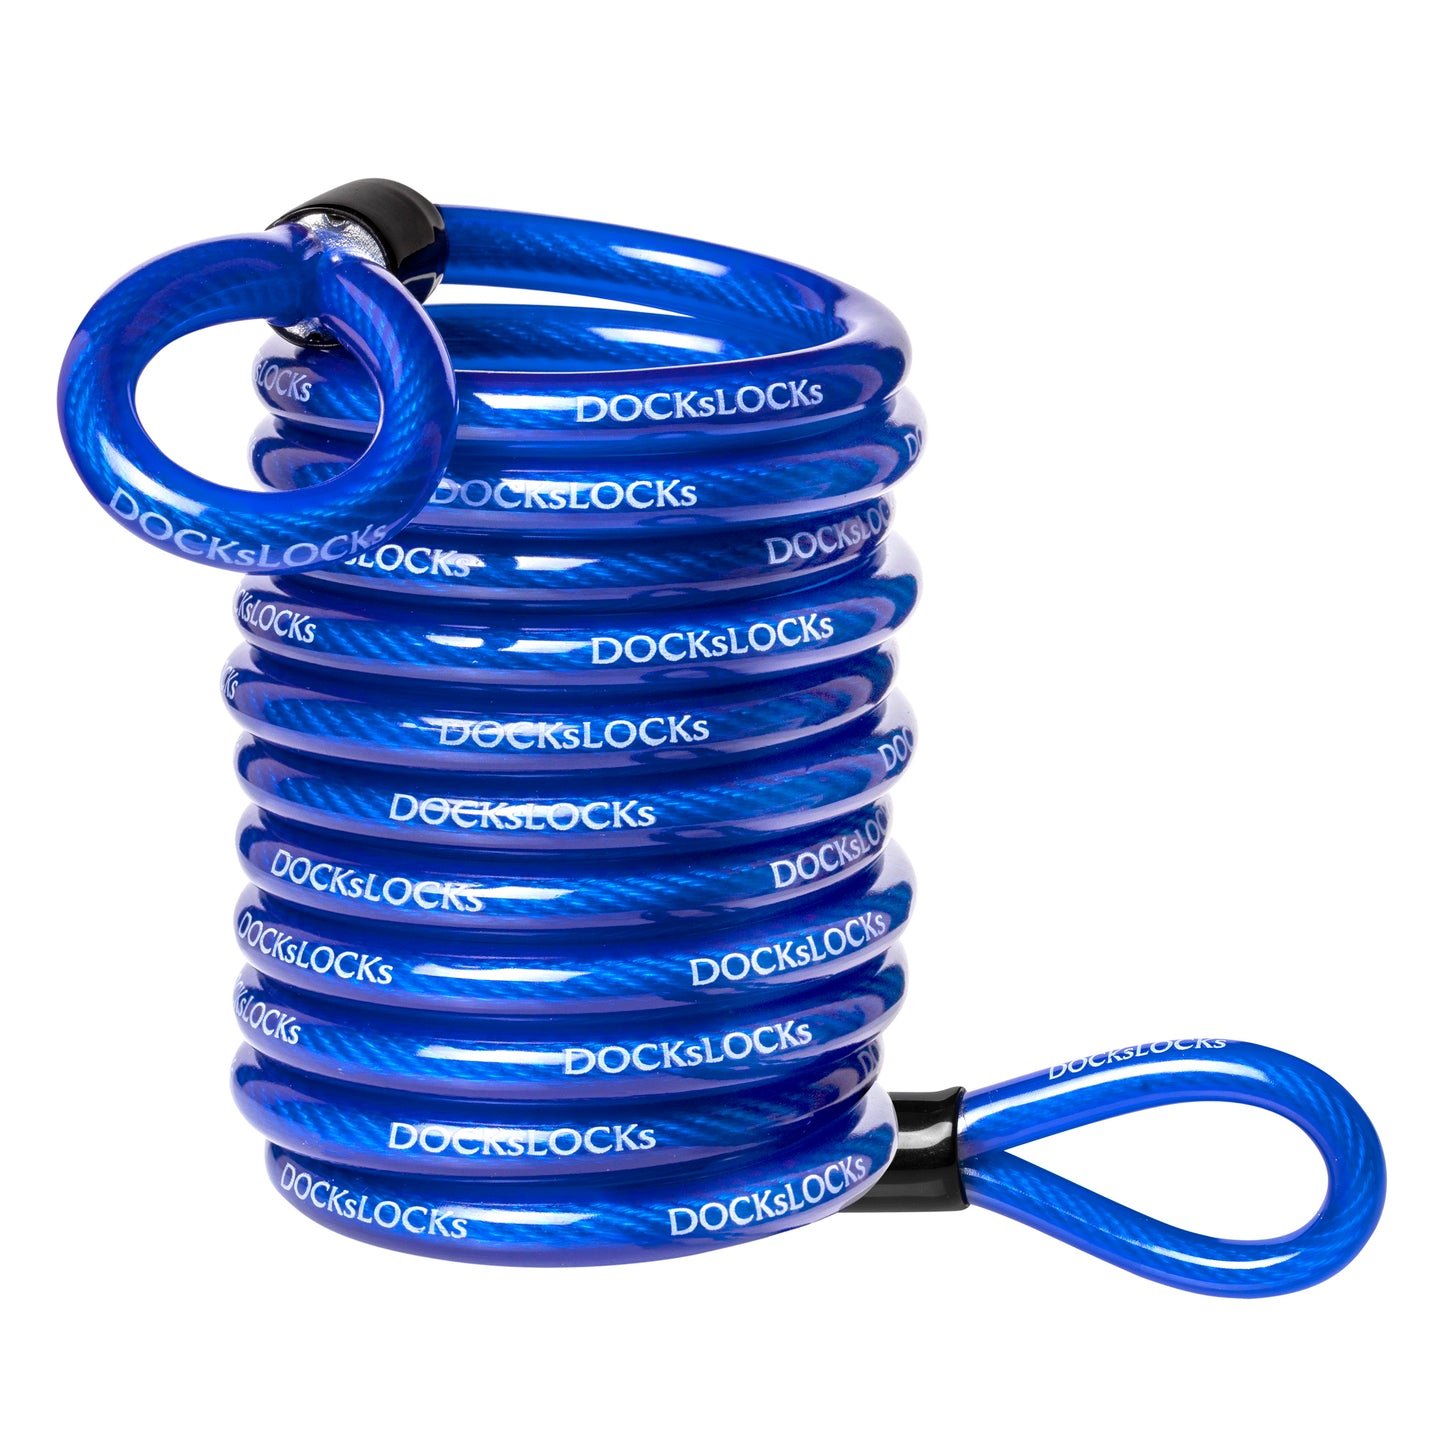 DocksLocks® Anti-Theft Weatherproof Coiled Security Cable with Looped Ends (5', 10', 15', 20' or 25')